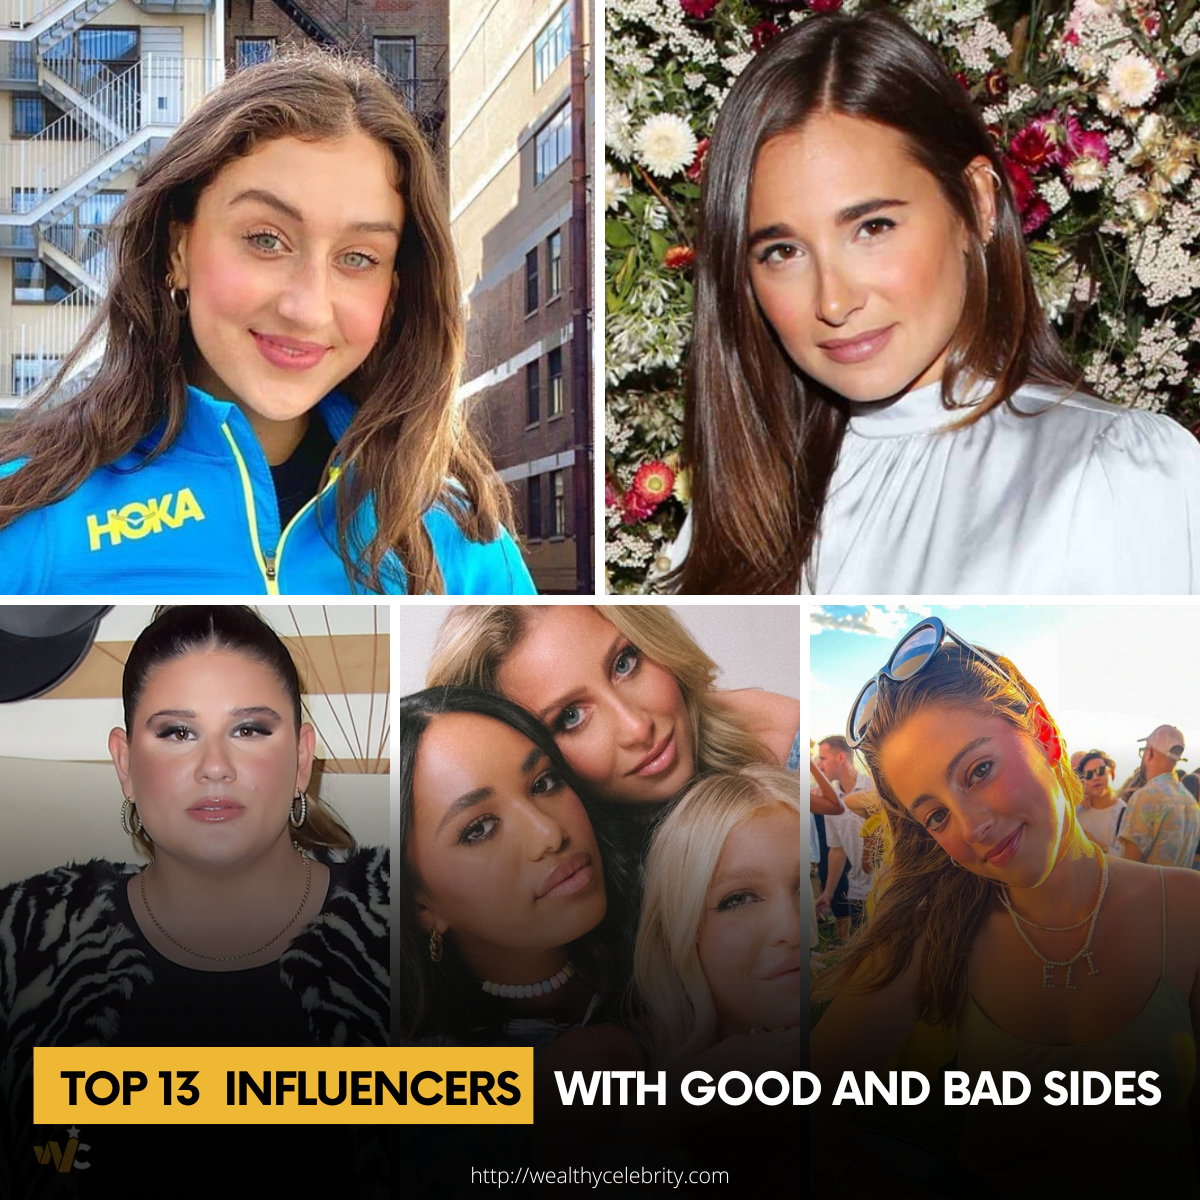 TOP 13 INFLUENCERS WITH GOOD AND BAD SIDES